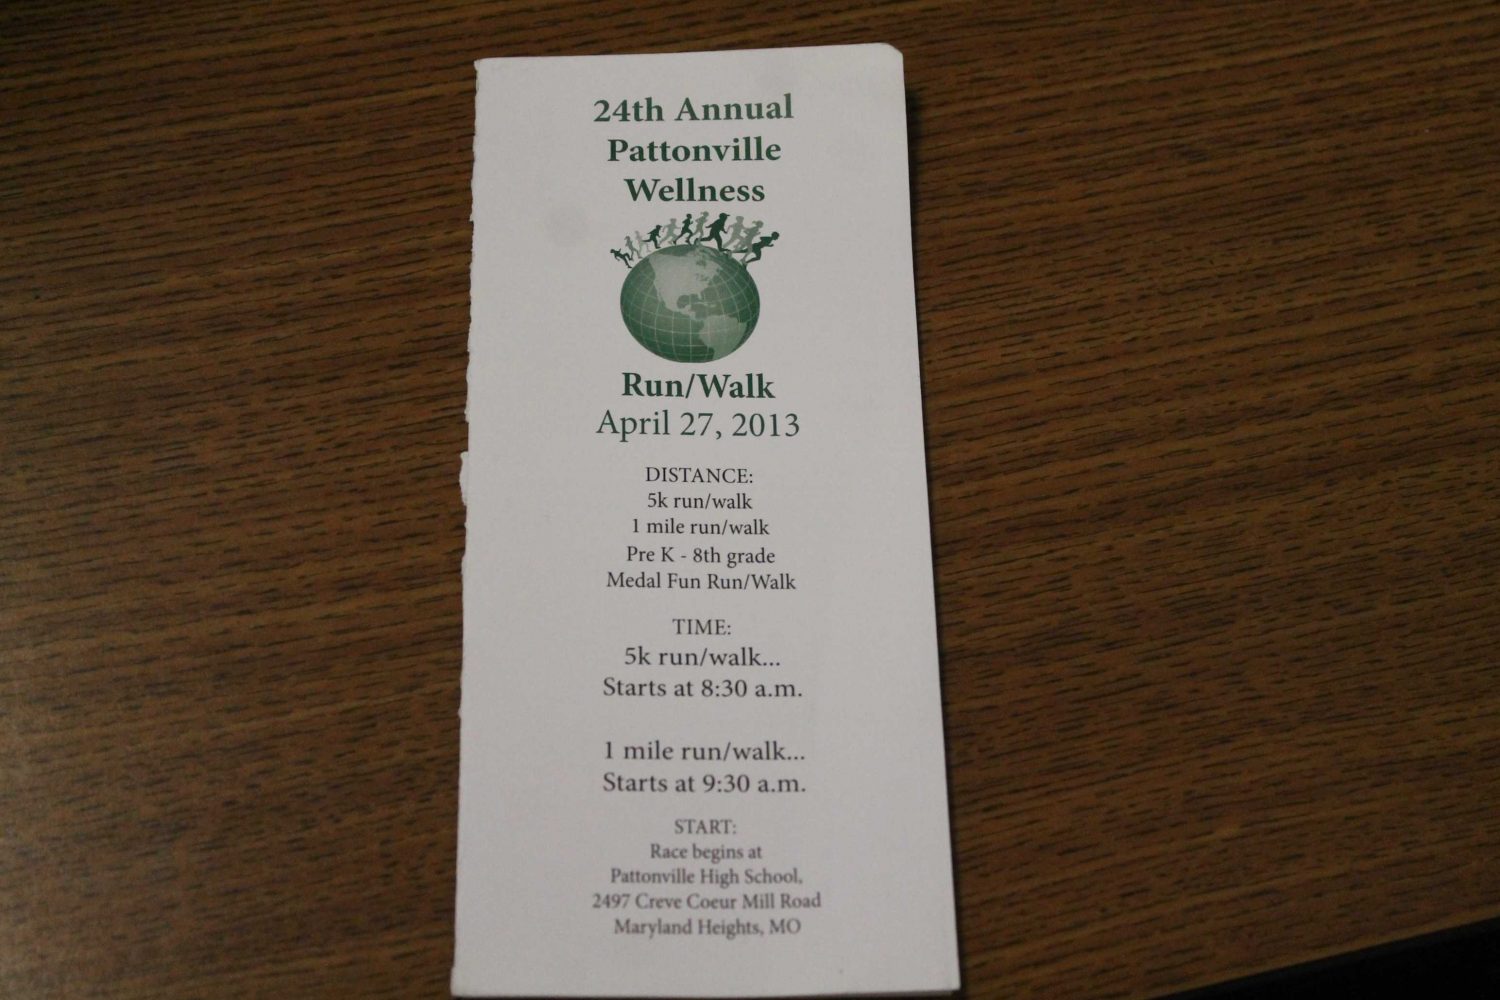 24th Annual Pattonville Wellness Run/Walk to be held April 27